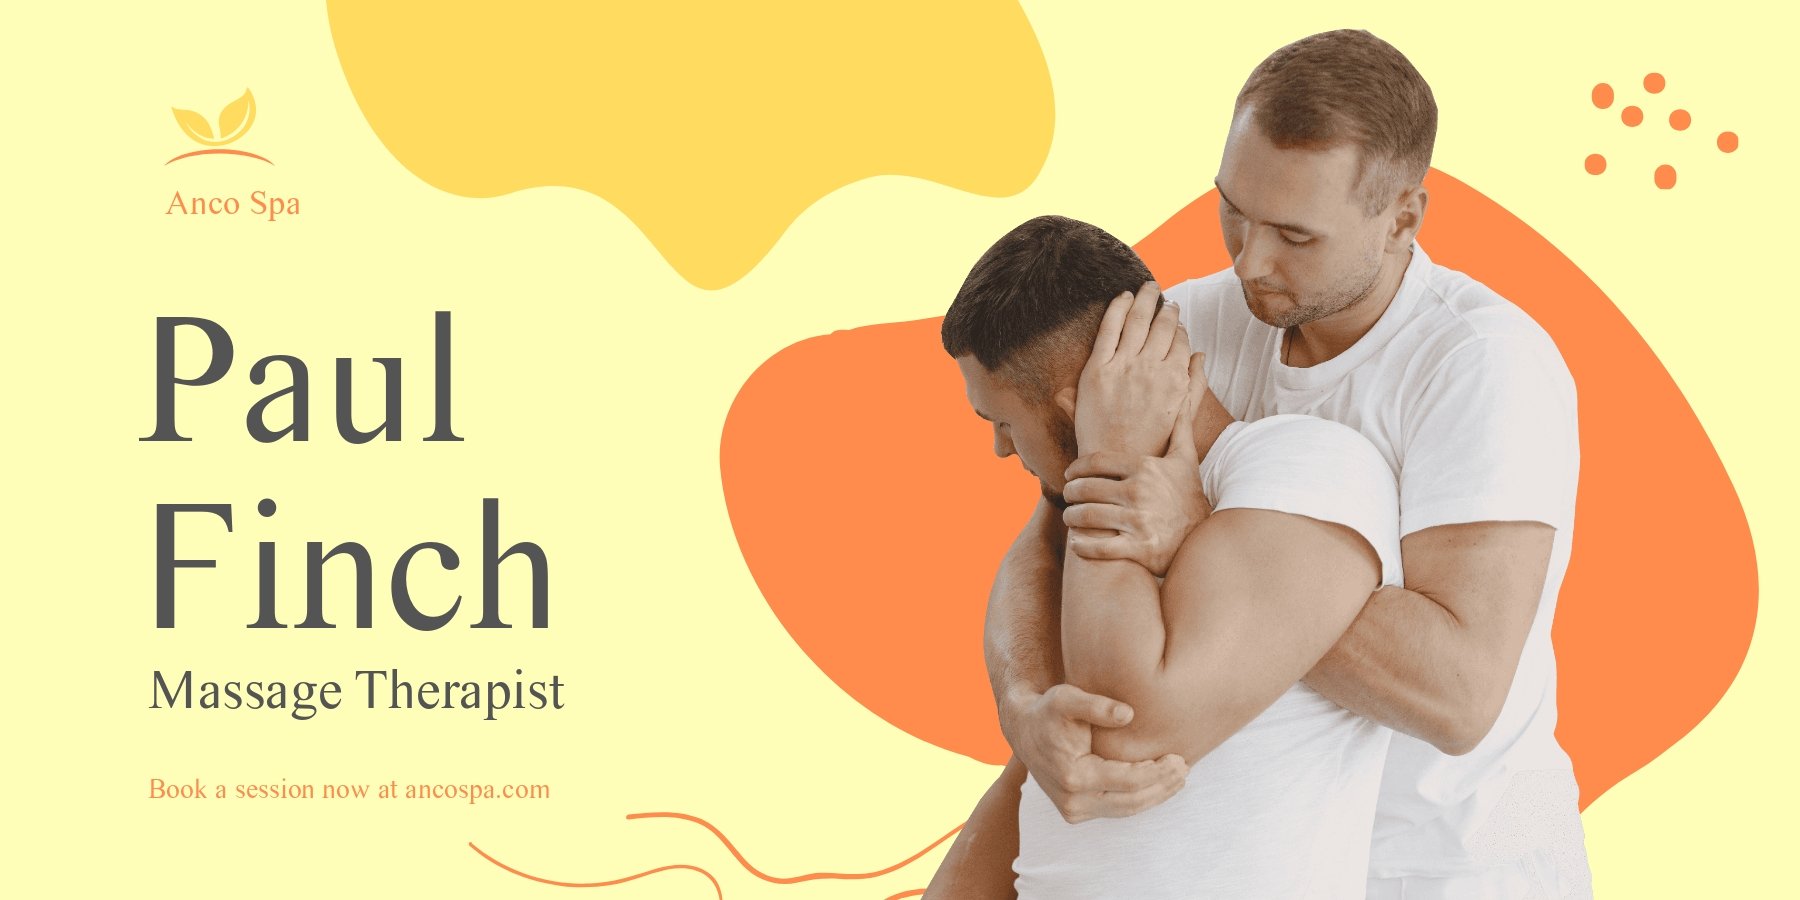 Massage Therapist Promotion Banner Template